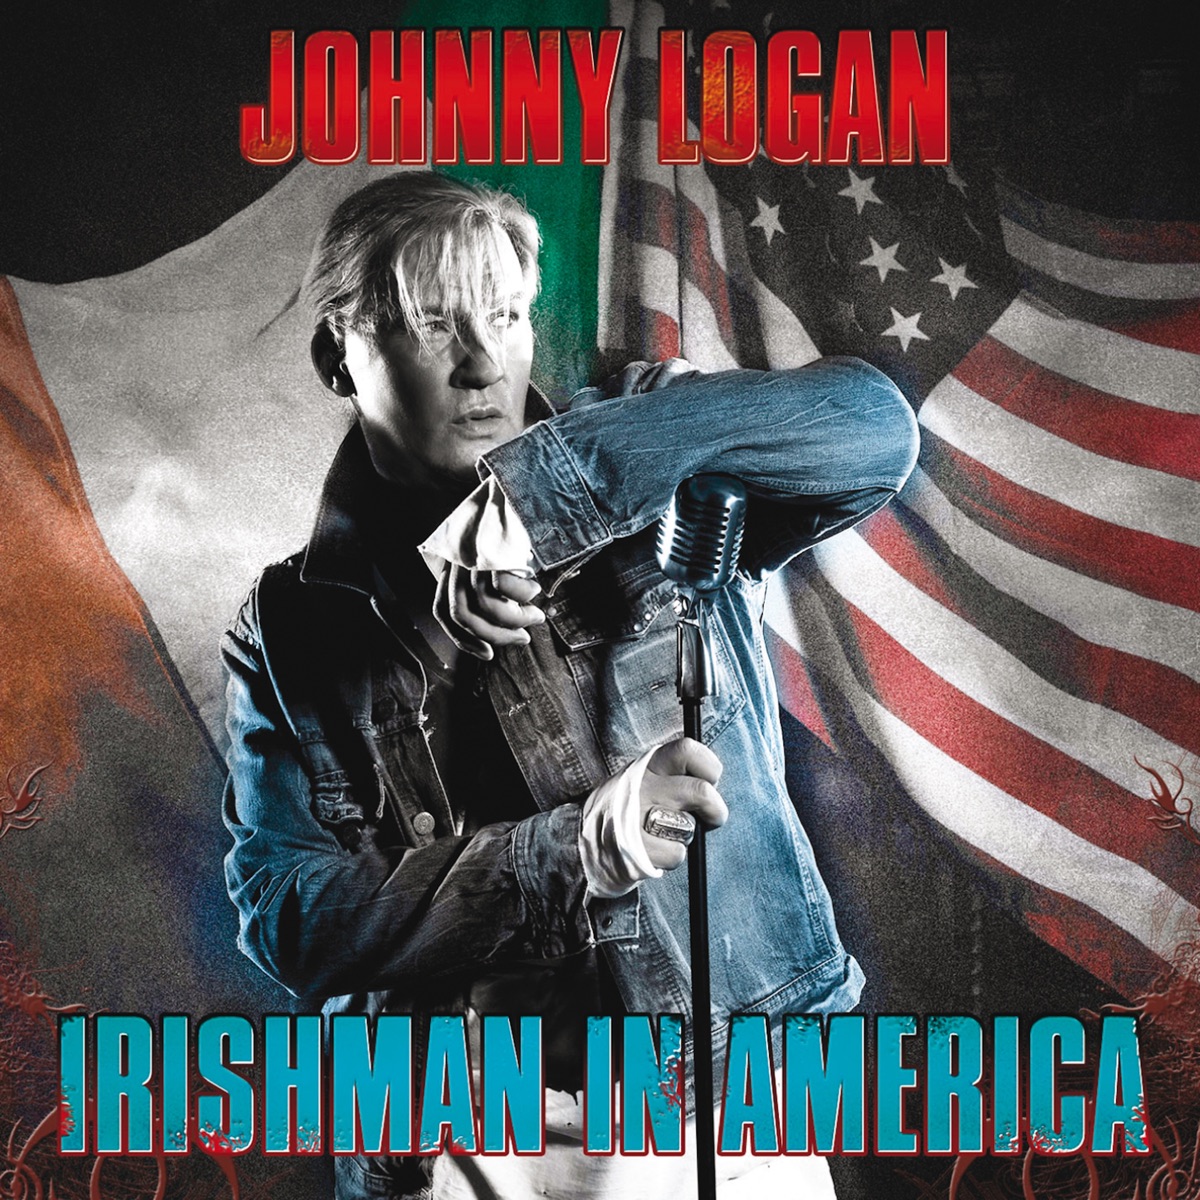 Nature Of Love by Johnny Logan on Apple Music